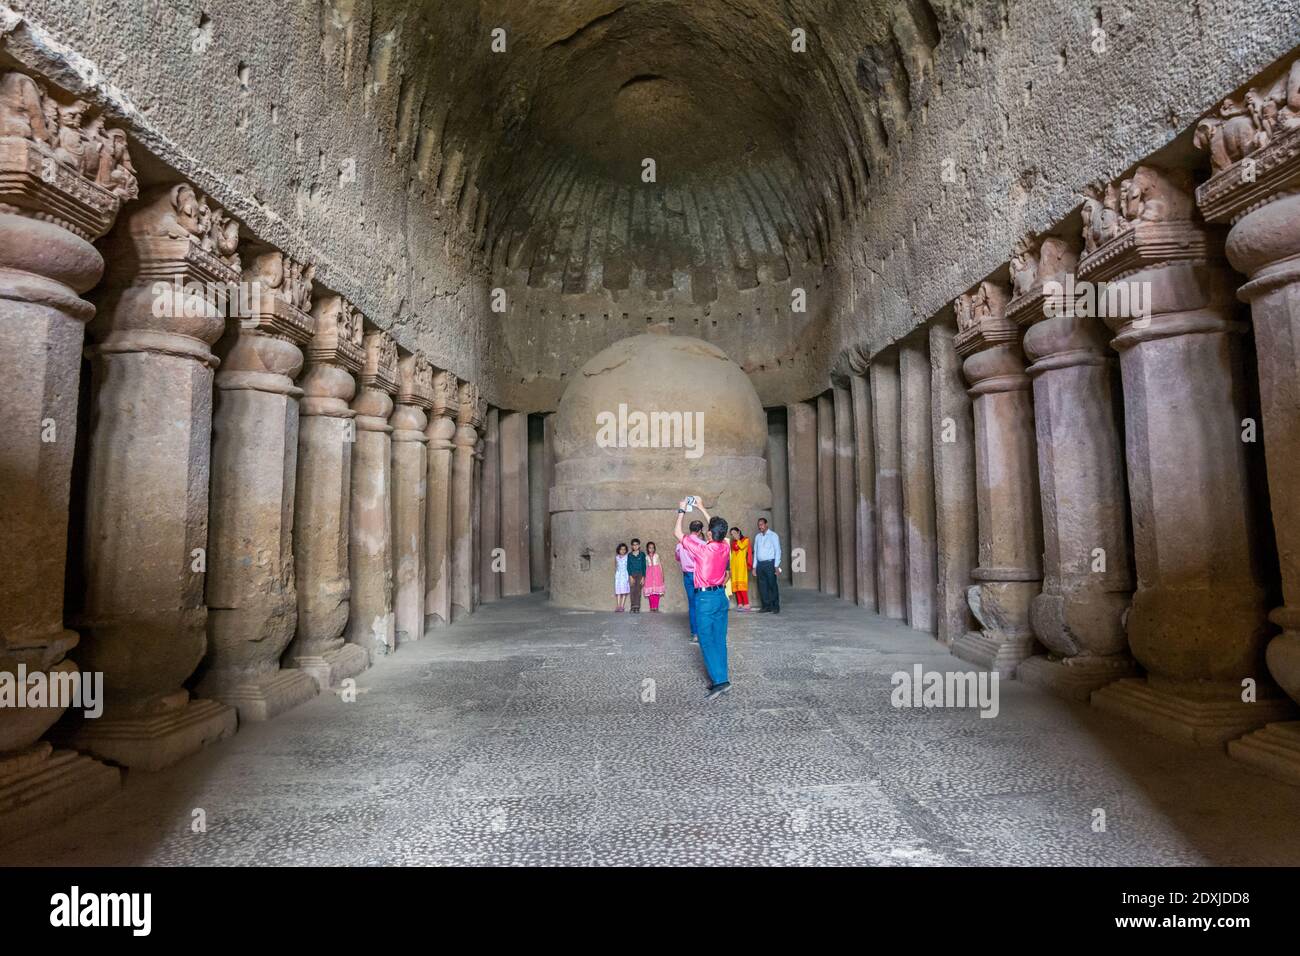 Visitors visiting Kanheri cave complex, which is situated inside the Sanjay Gandhi National Park in the Borivali region of Mumbai, Indian Stock Photo